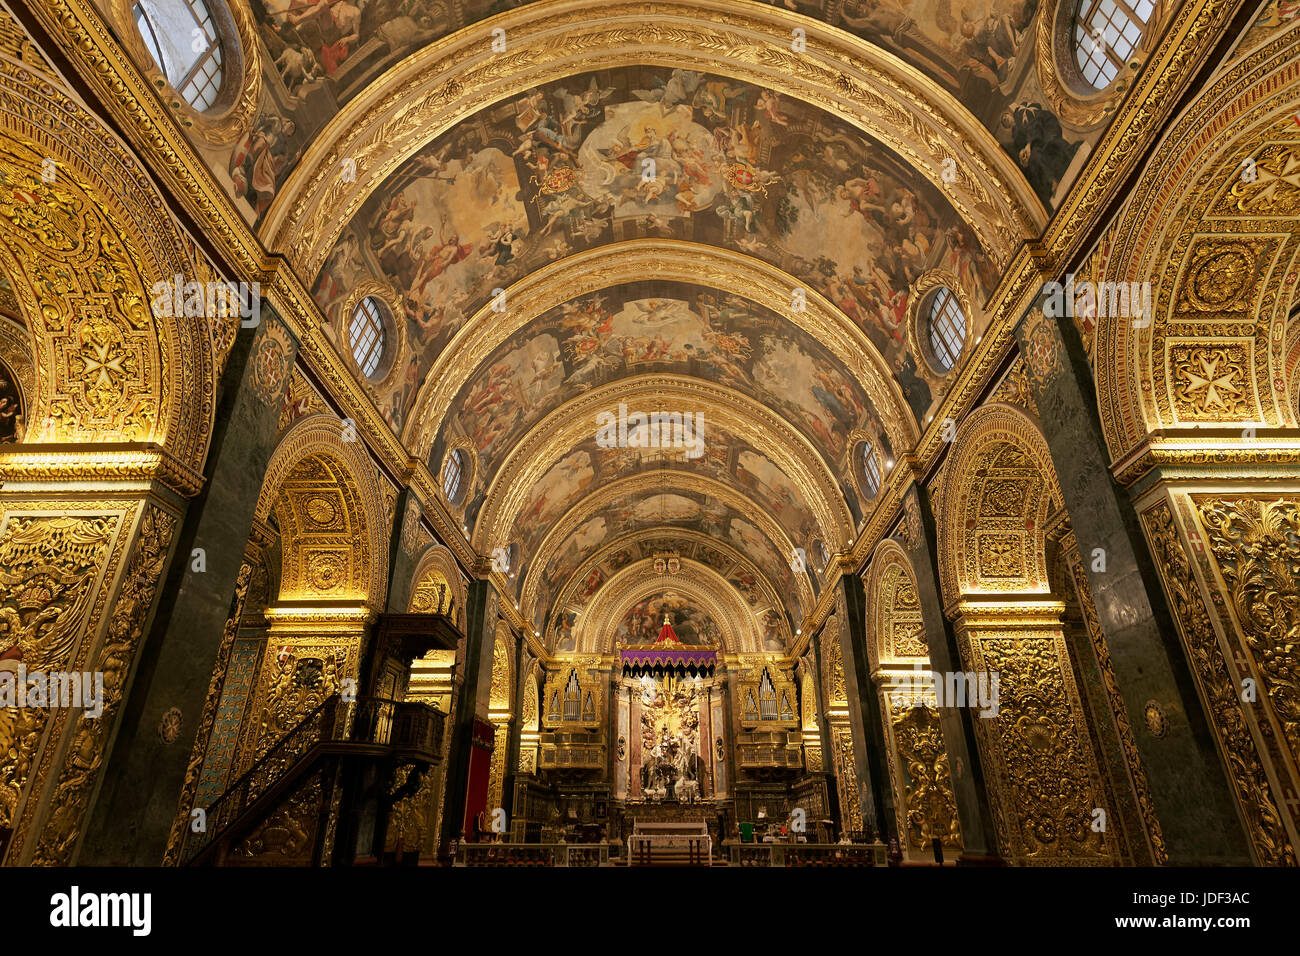 St. John's Co-Cathedral, gold-decorated nave with ceiling paintings by Mattia Preti, Baroque, Valletta, Malta Stock Photo